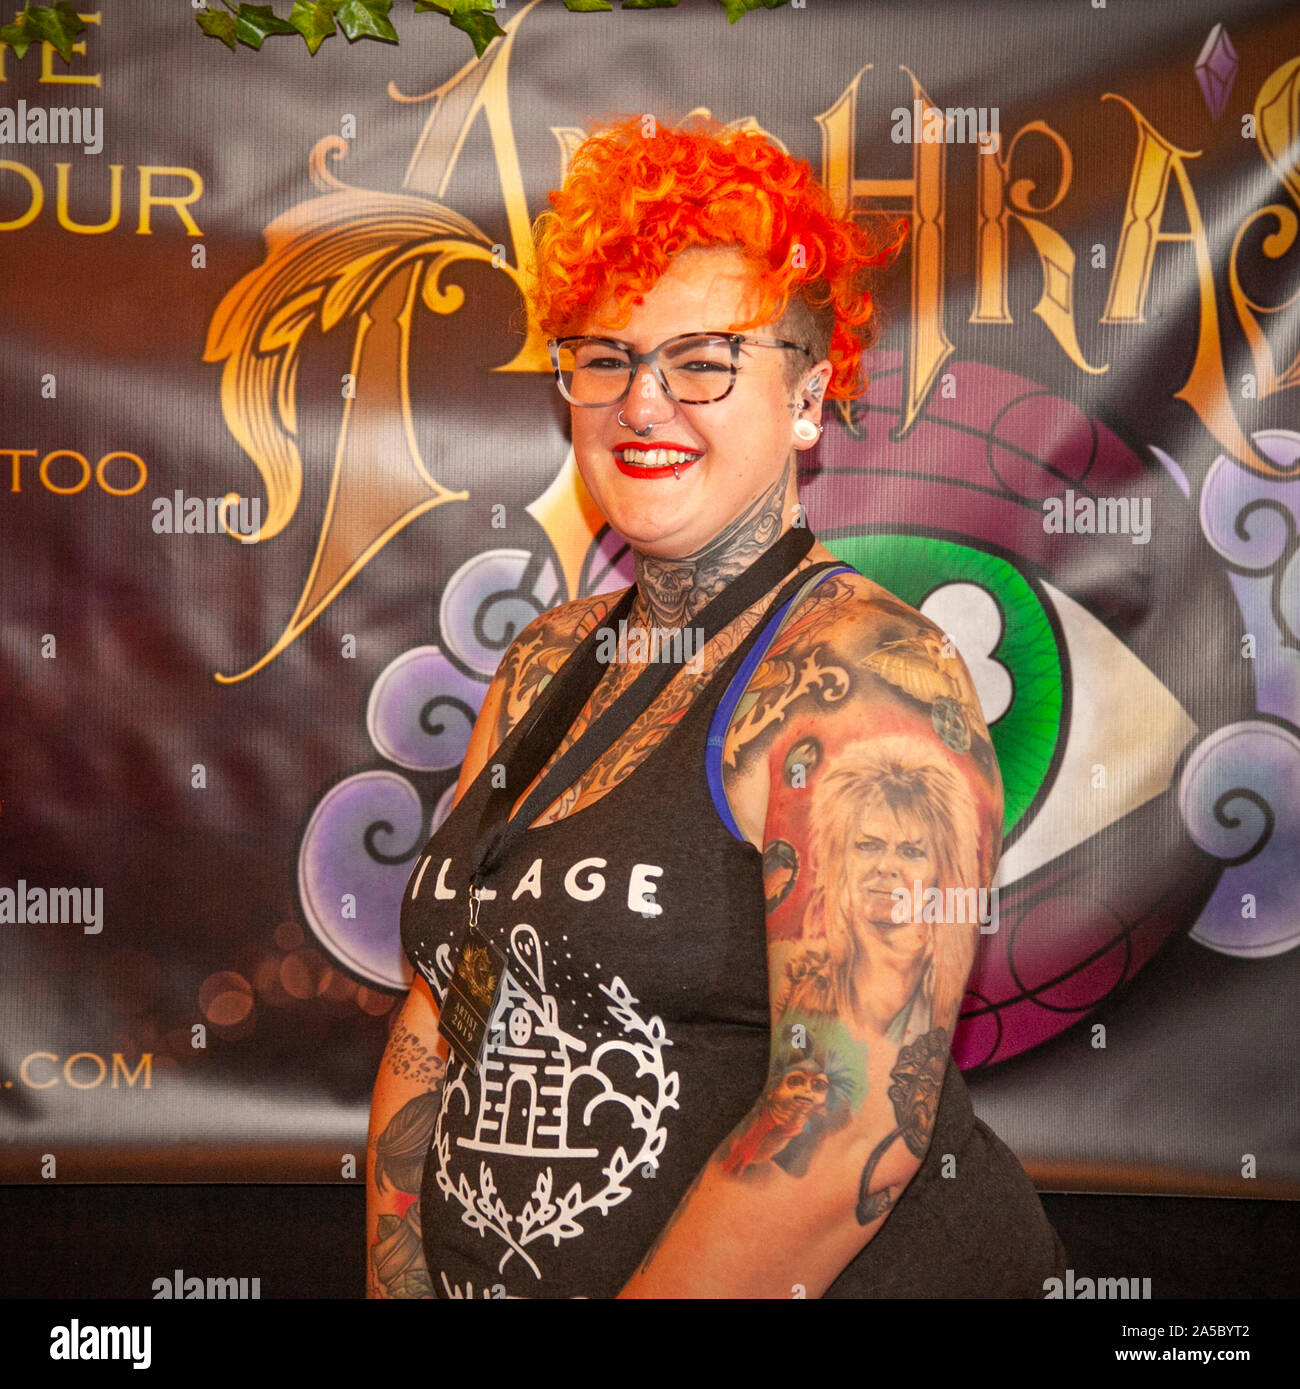 Female body tattoos in Liverpool, Merseyside, 19th October, 2019. Body tattoos at the Adelphi International Tattoo Convention. UK national and international tattoo artists, staging the UK Tattoo Awards, tattoo competitions. Organised by Liverpool tattoo studio ‘Design 4 Life’, the Liverpool Tattoo Convention is regarded as a must-attend and well respected show in the industry, honouring tattoo culture, lifestyle and art. Credit: MediaWorldImages/AlamyLiveNews Stock Photo